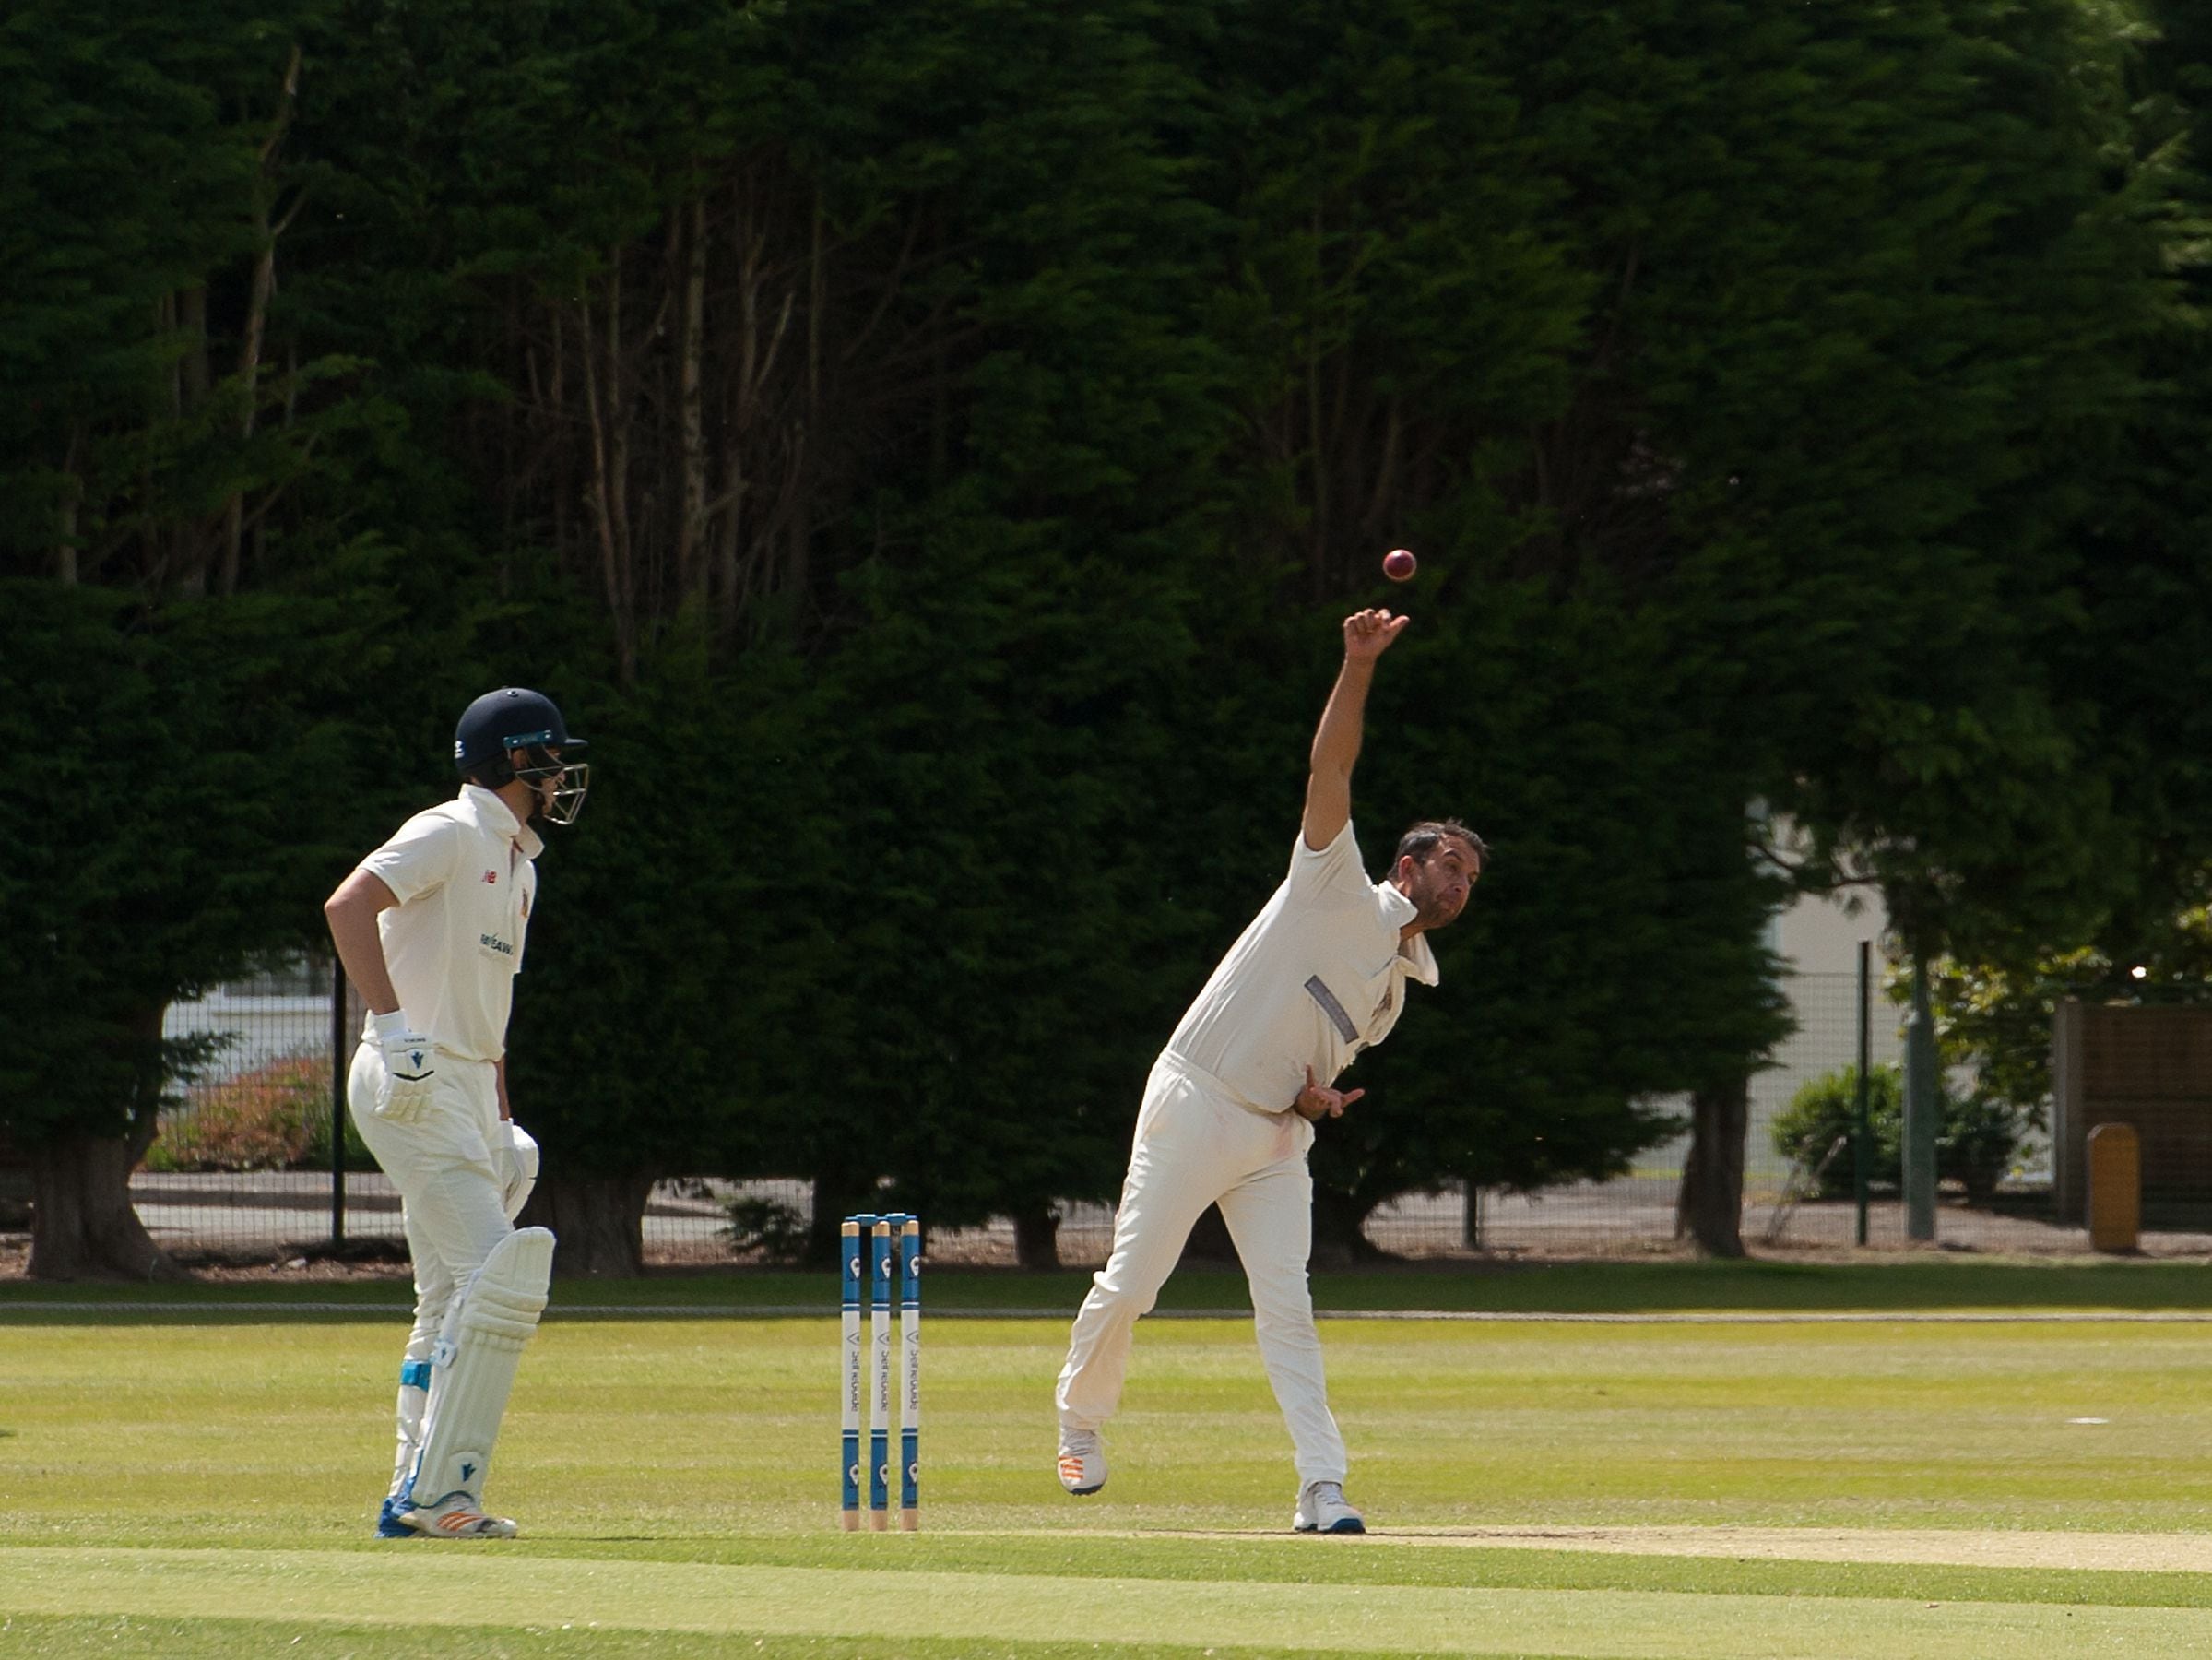 Smethwick back on top as they hold Dartmouth down